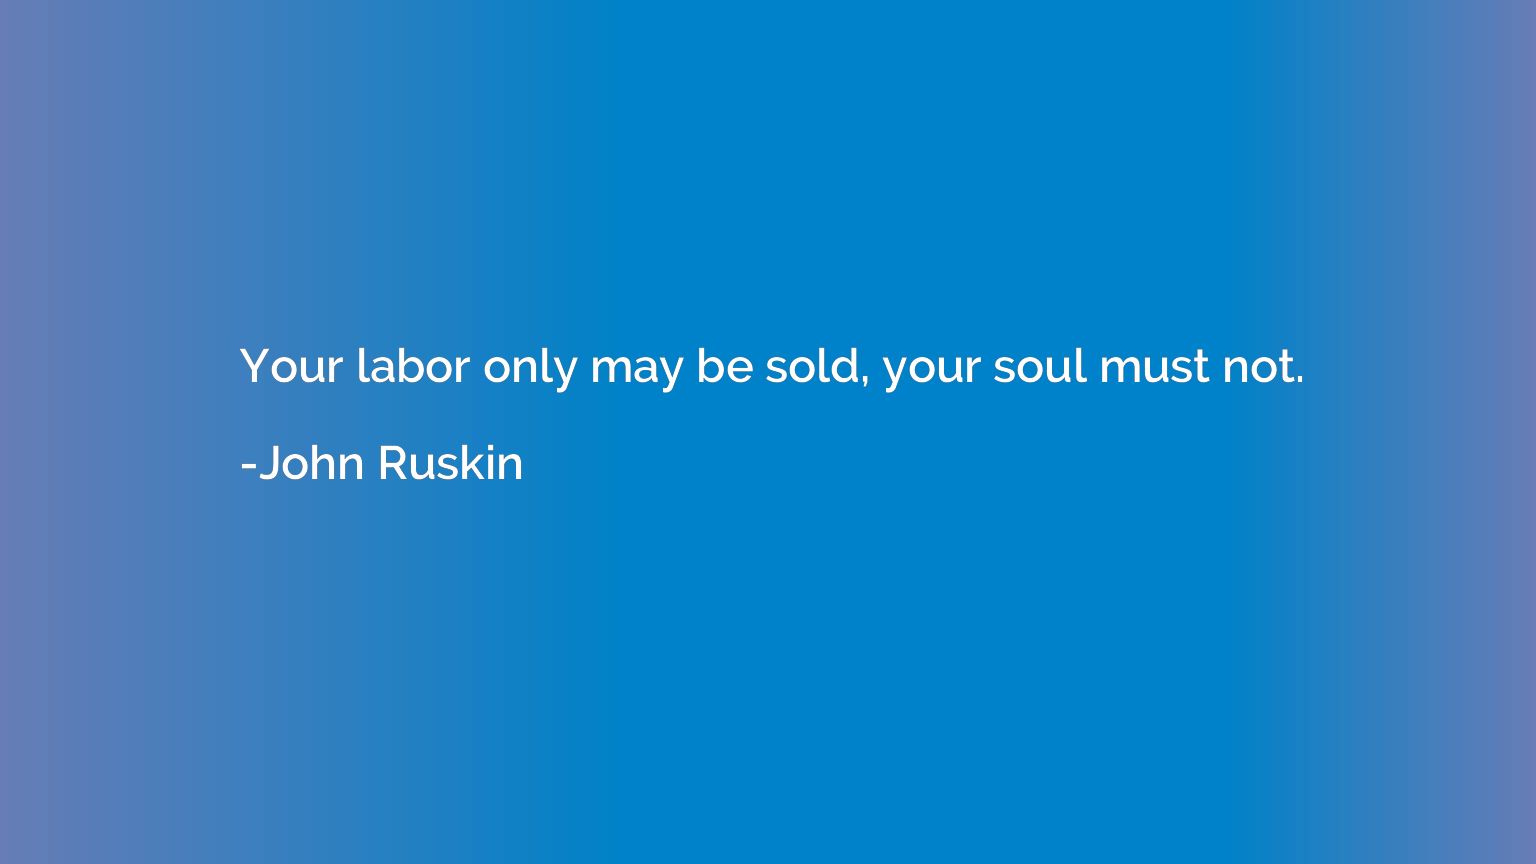 Your labor only may be sold, your soul must not.